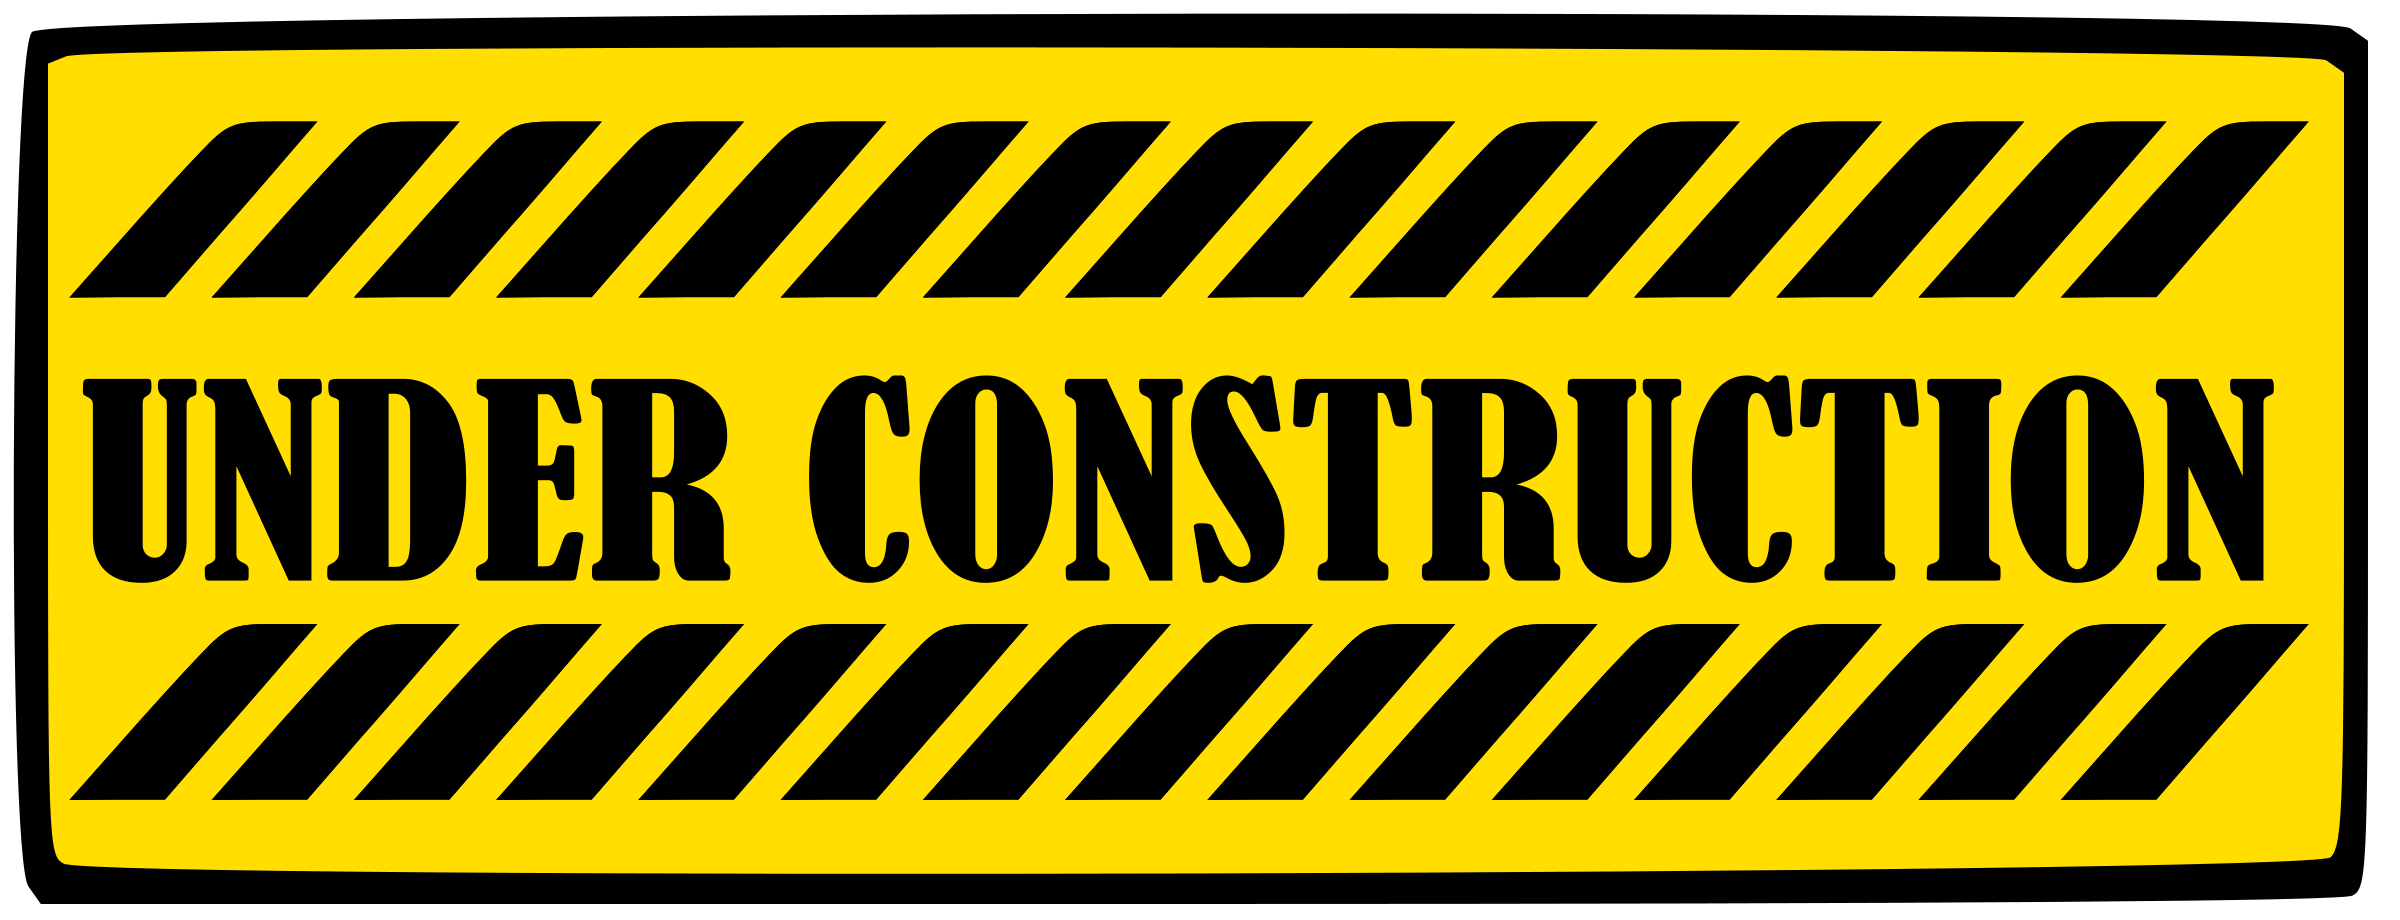 Building Clipart Under Construction Clipart Gallery ~ Free Clipart.